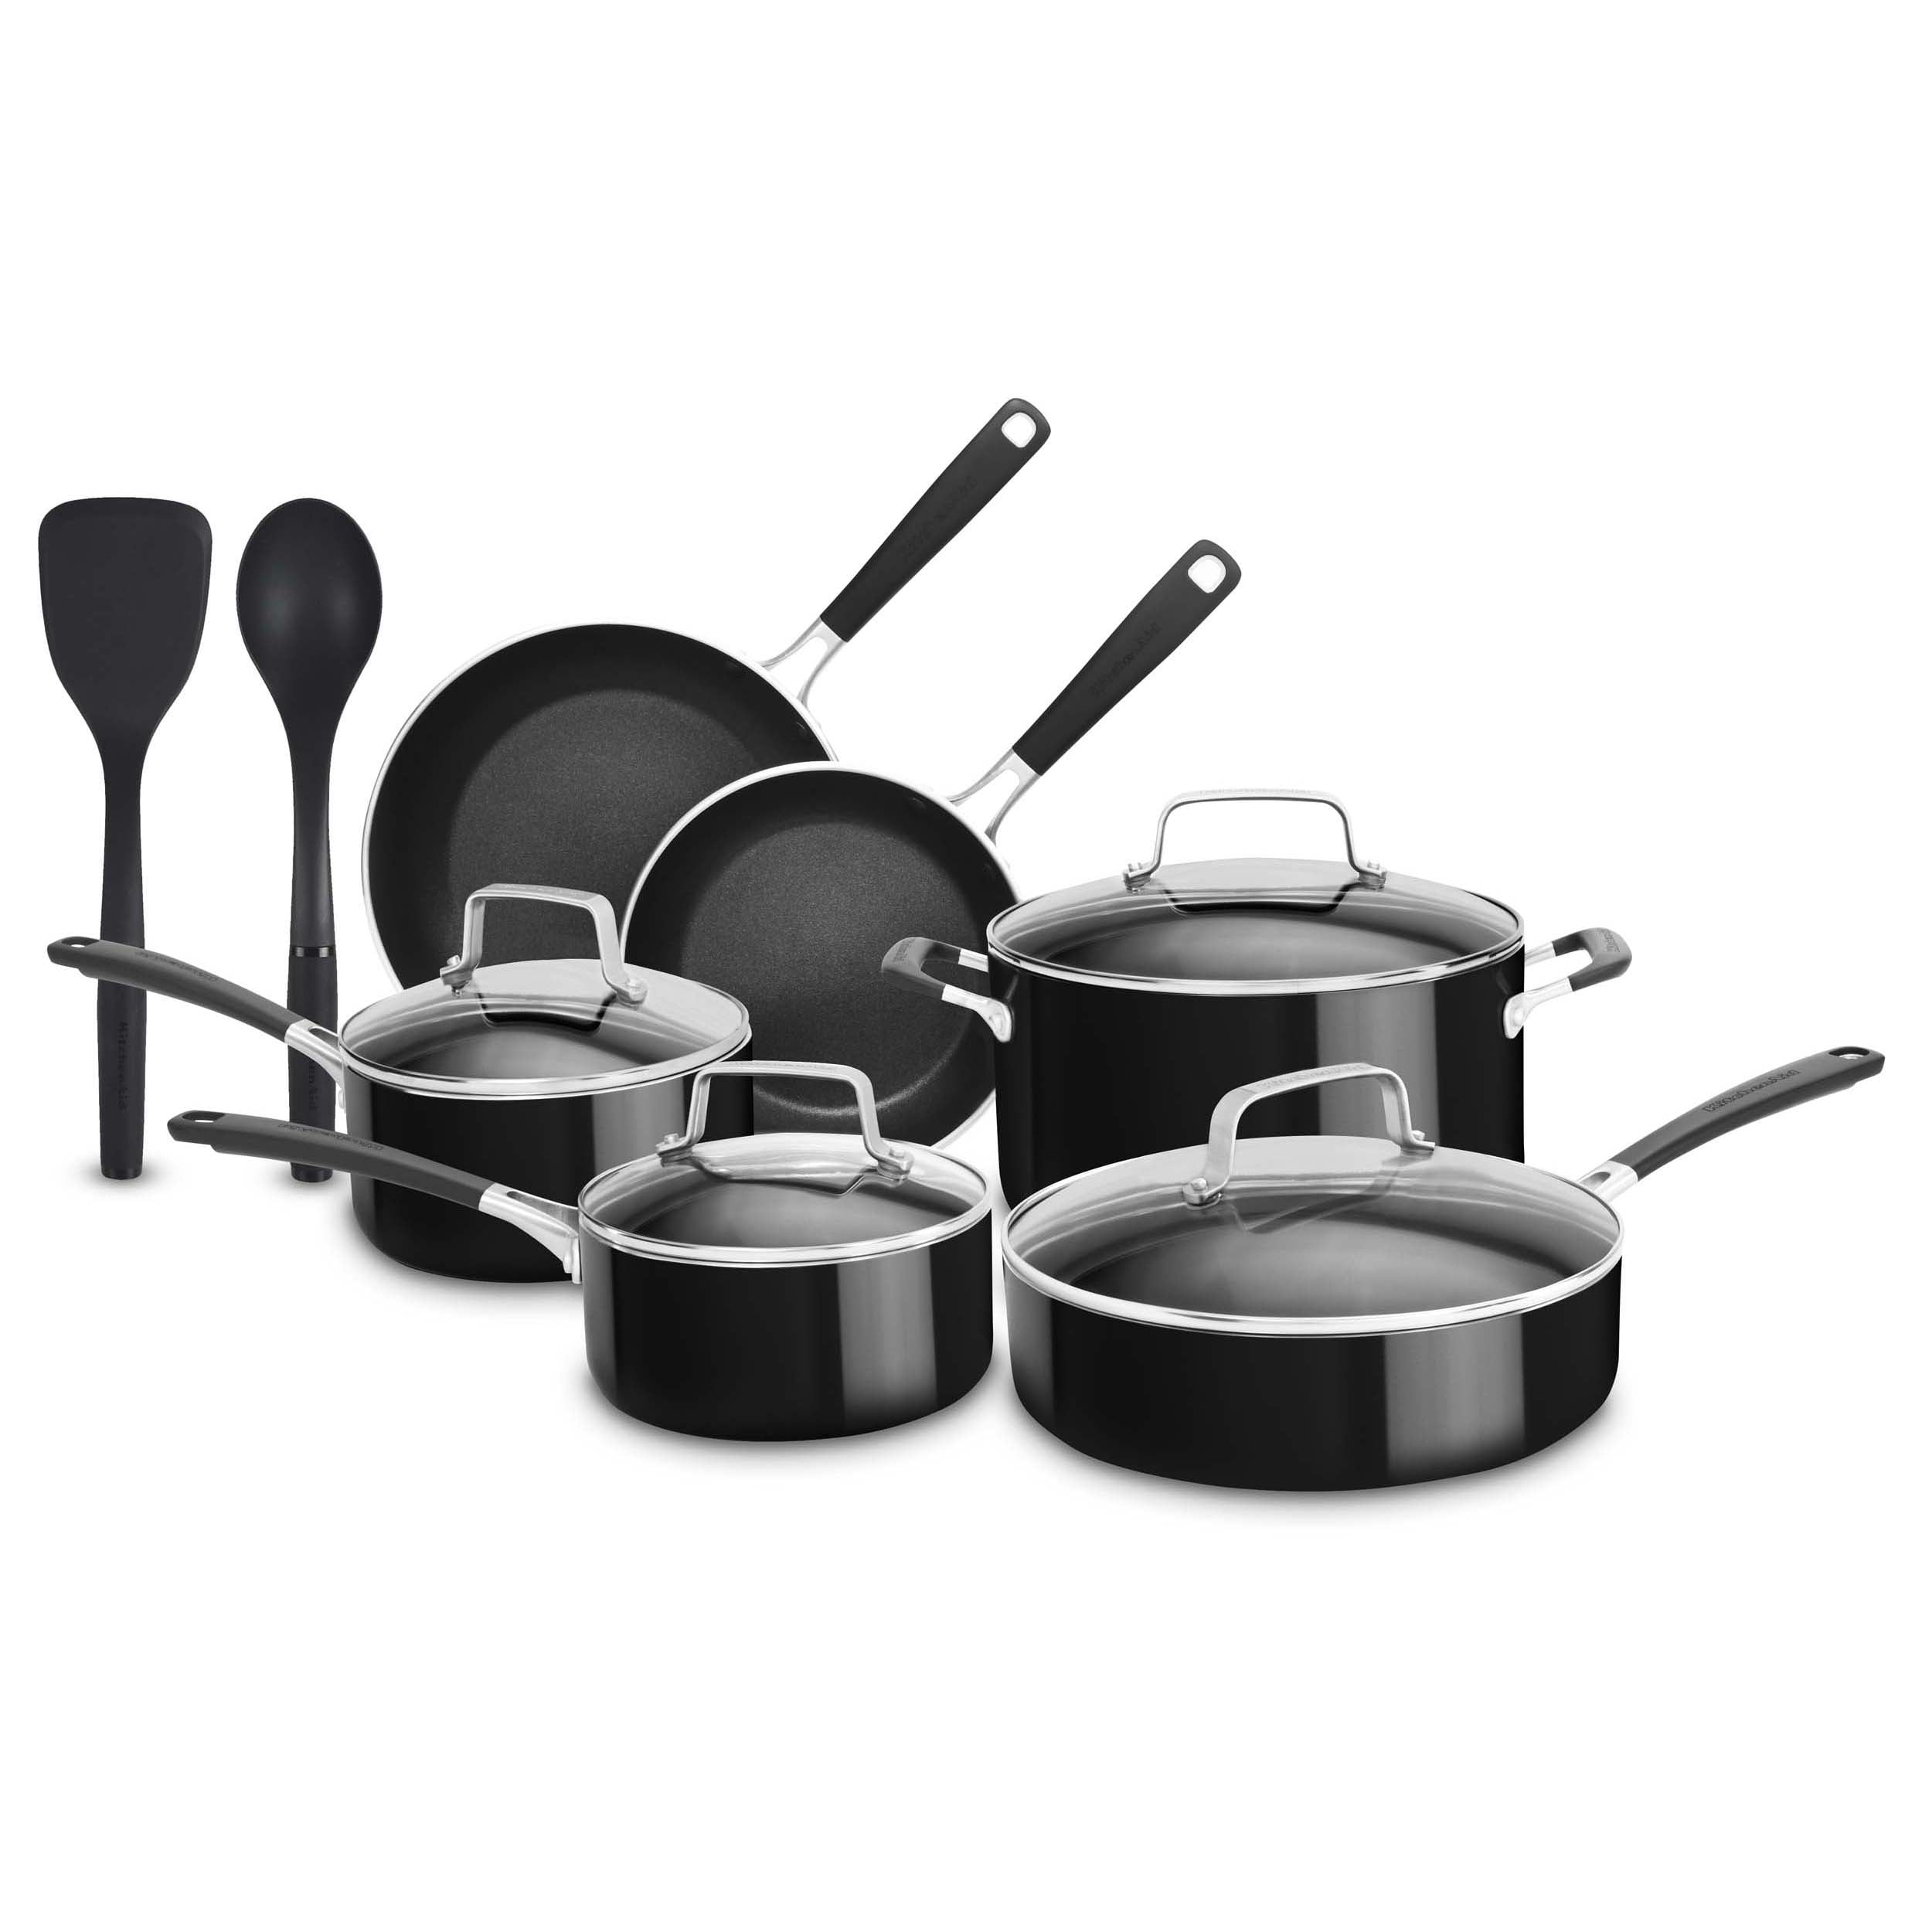 Motase 12 Pieces Kitchen Nonstick Frying Pan Sets Aluminum Cookware with Removable Handle,White, Size: 12PS